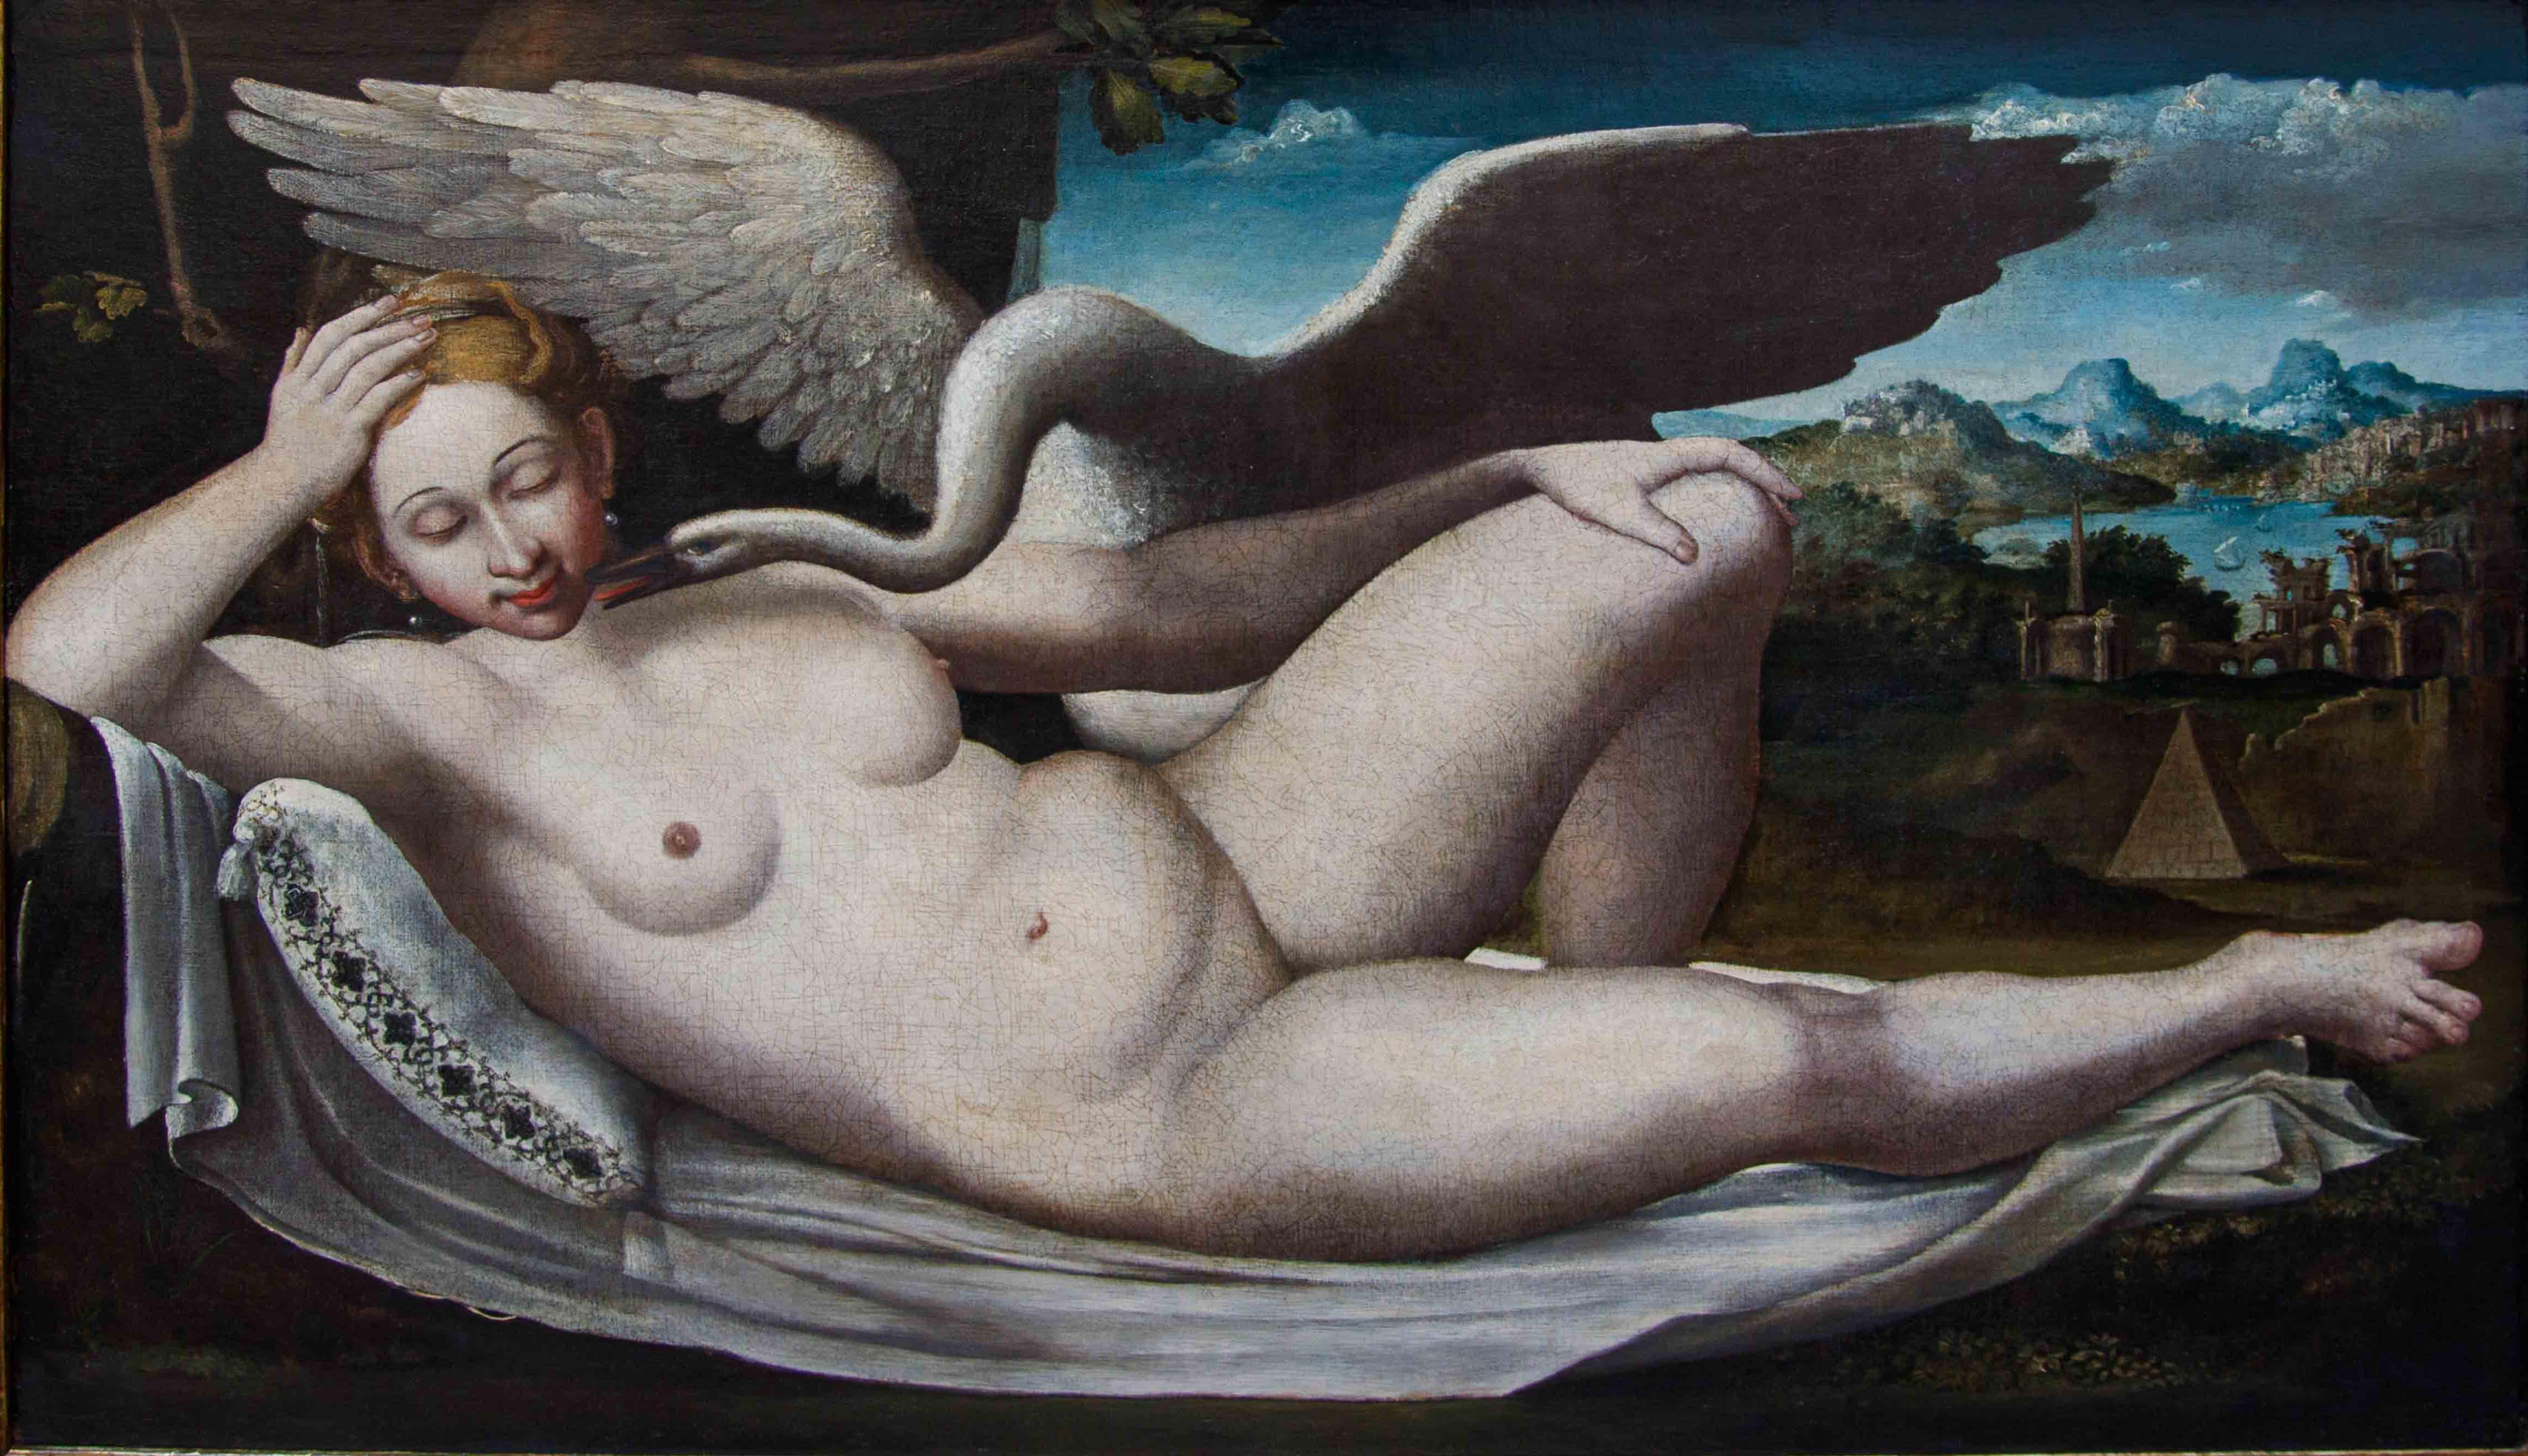 Mannerist painter, 16th century

Leda and the Swan

Oil on canvas, 87.5 x 142 cm

Initial 'P' in center of pillow embroidery

Leda, queen of Sparta and bride of Tindarus, is lying on a sheet with her torso raised by a white pillow. To his figure,